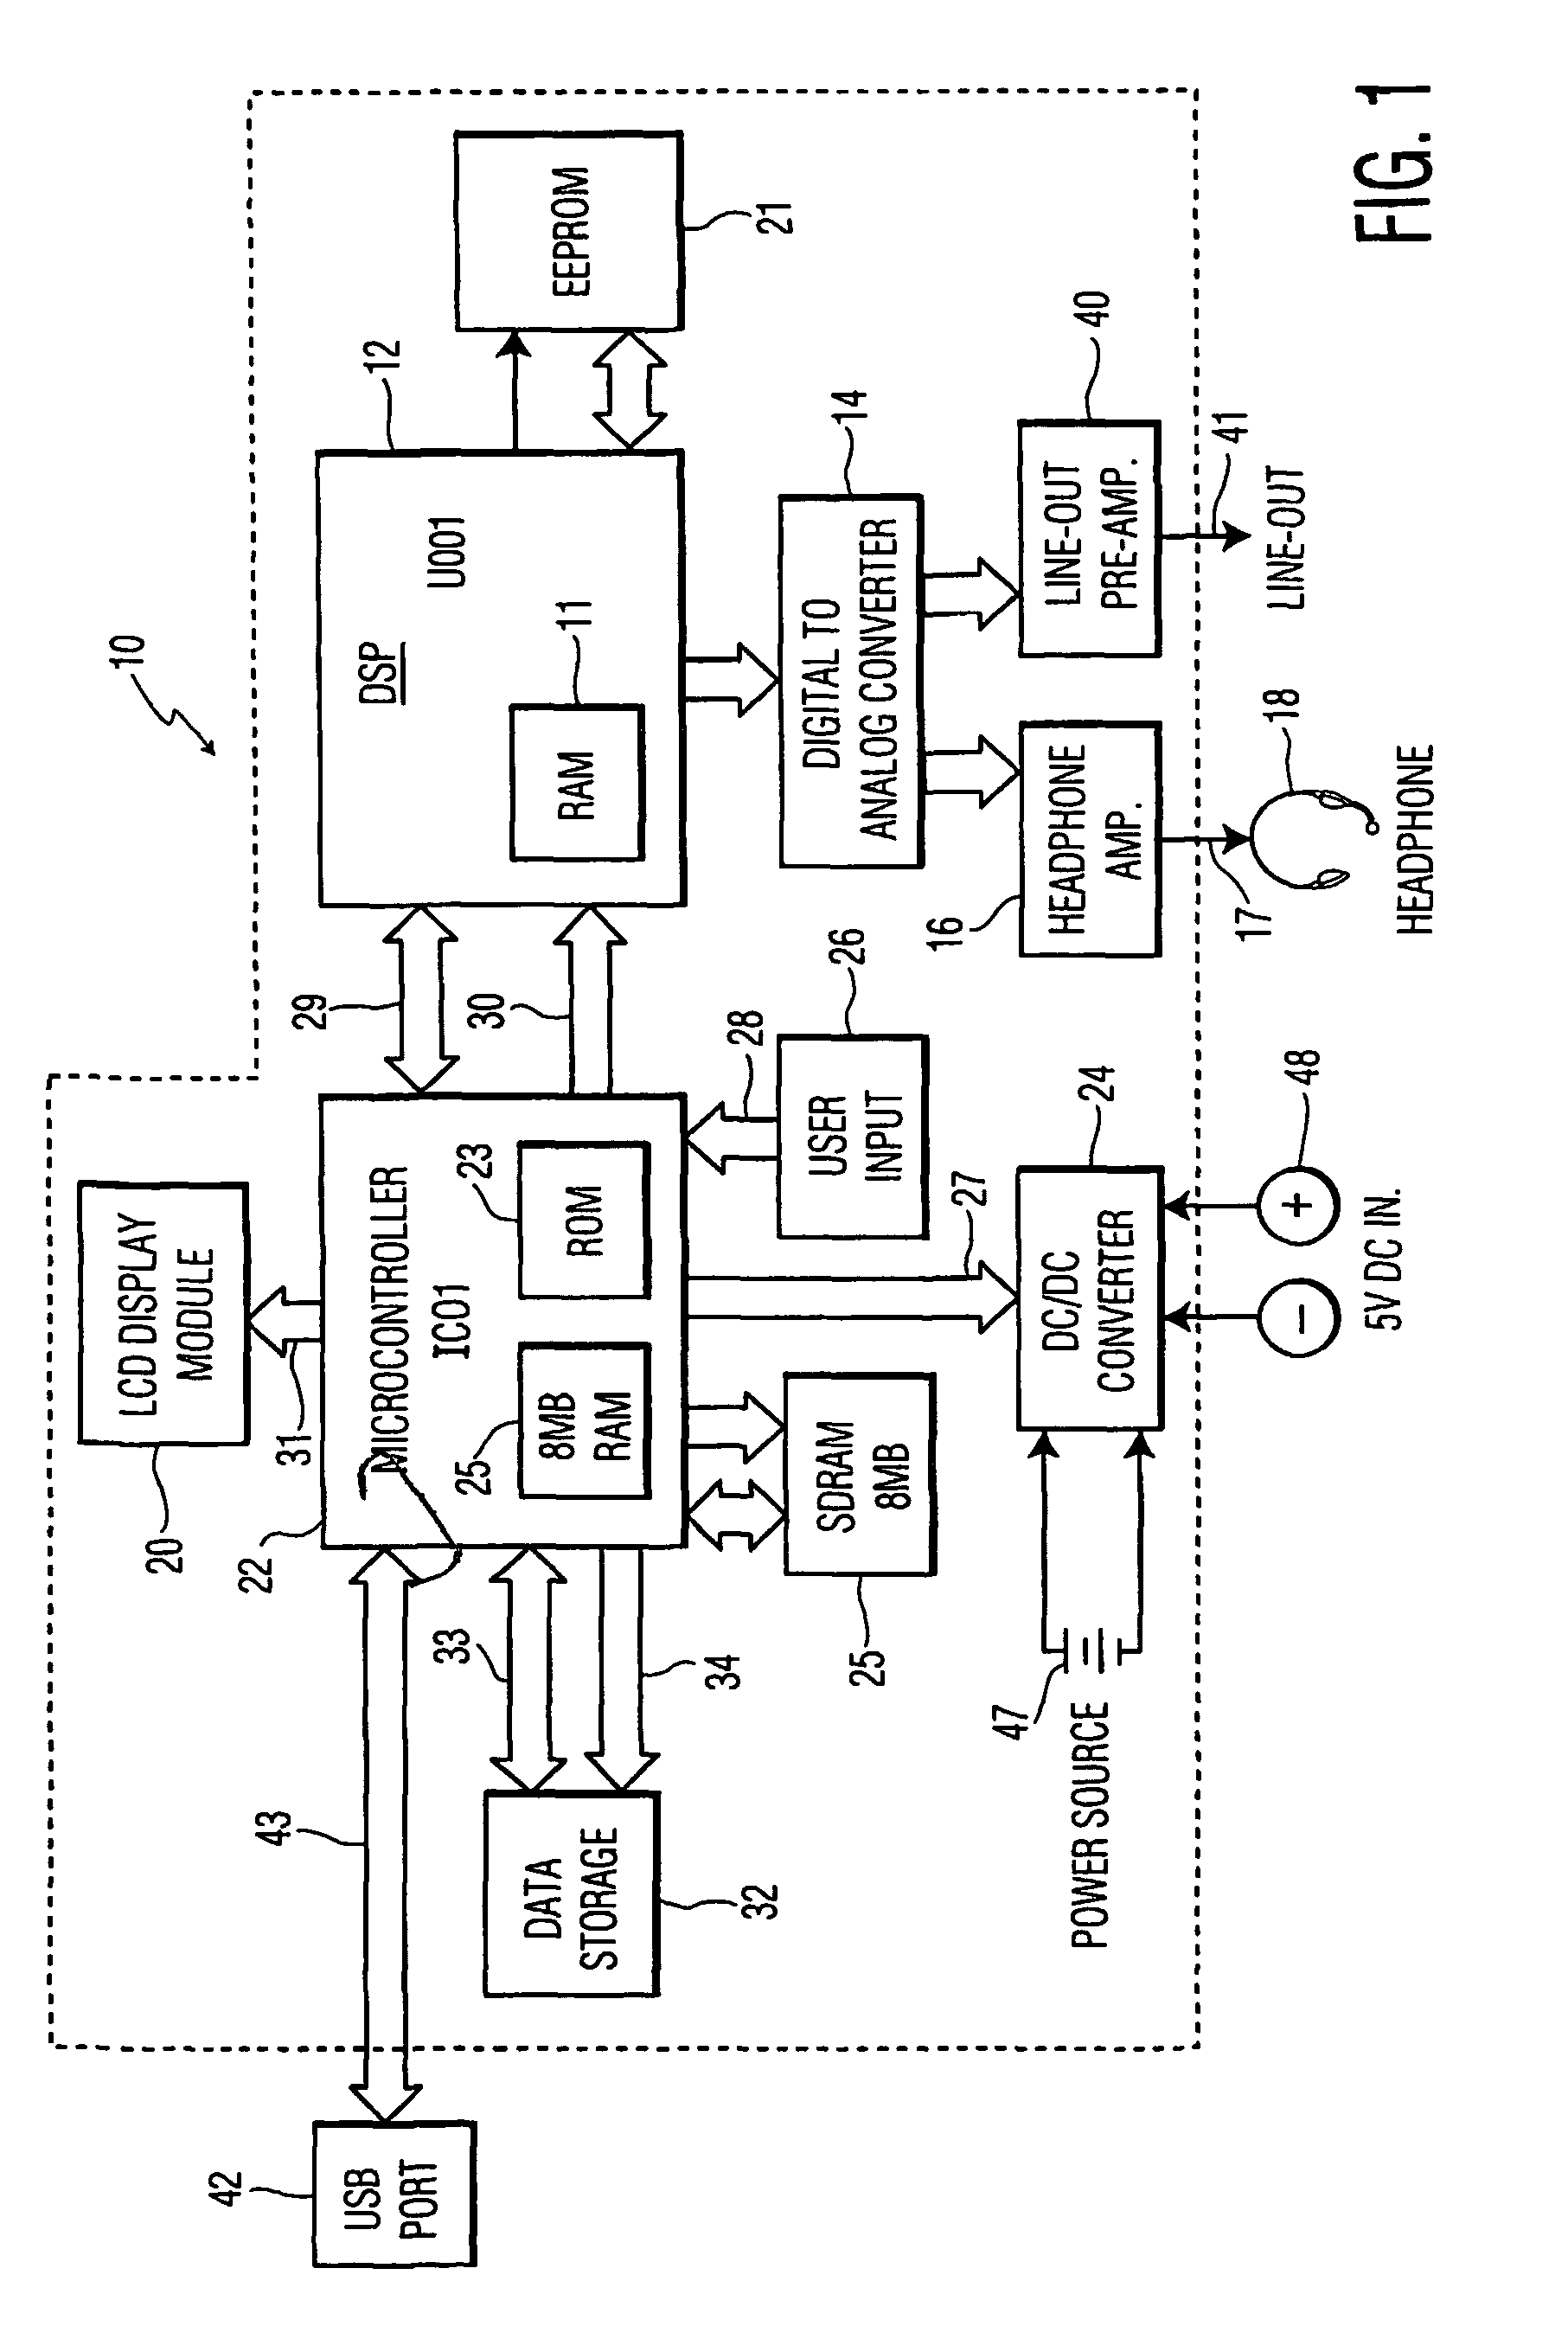 Method and apparatus for elapsed playback timekeeping of variable bit-rate digitally encoded audio data files